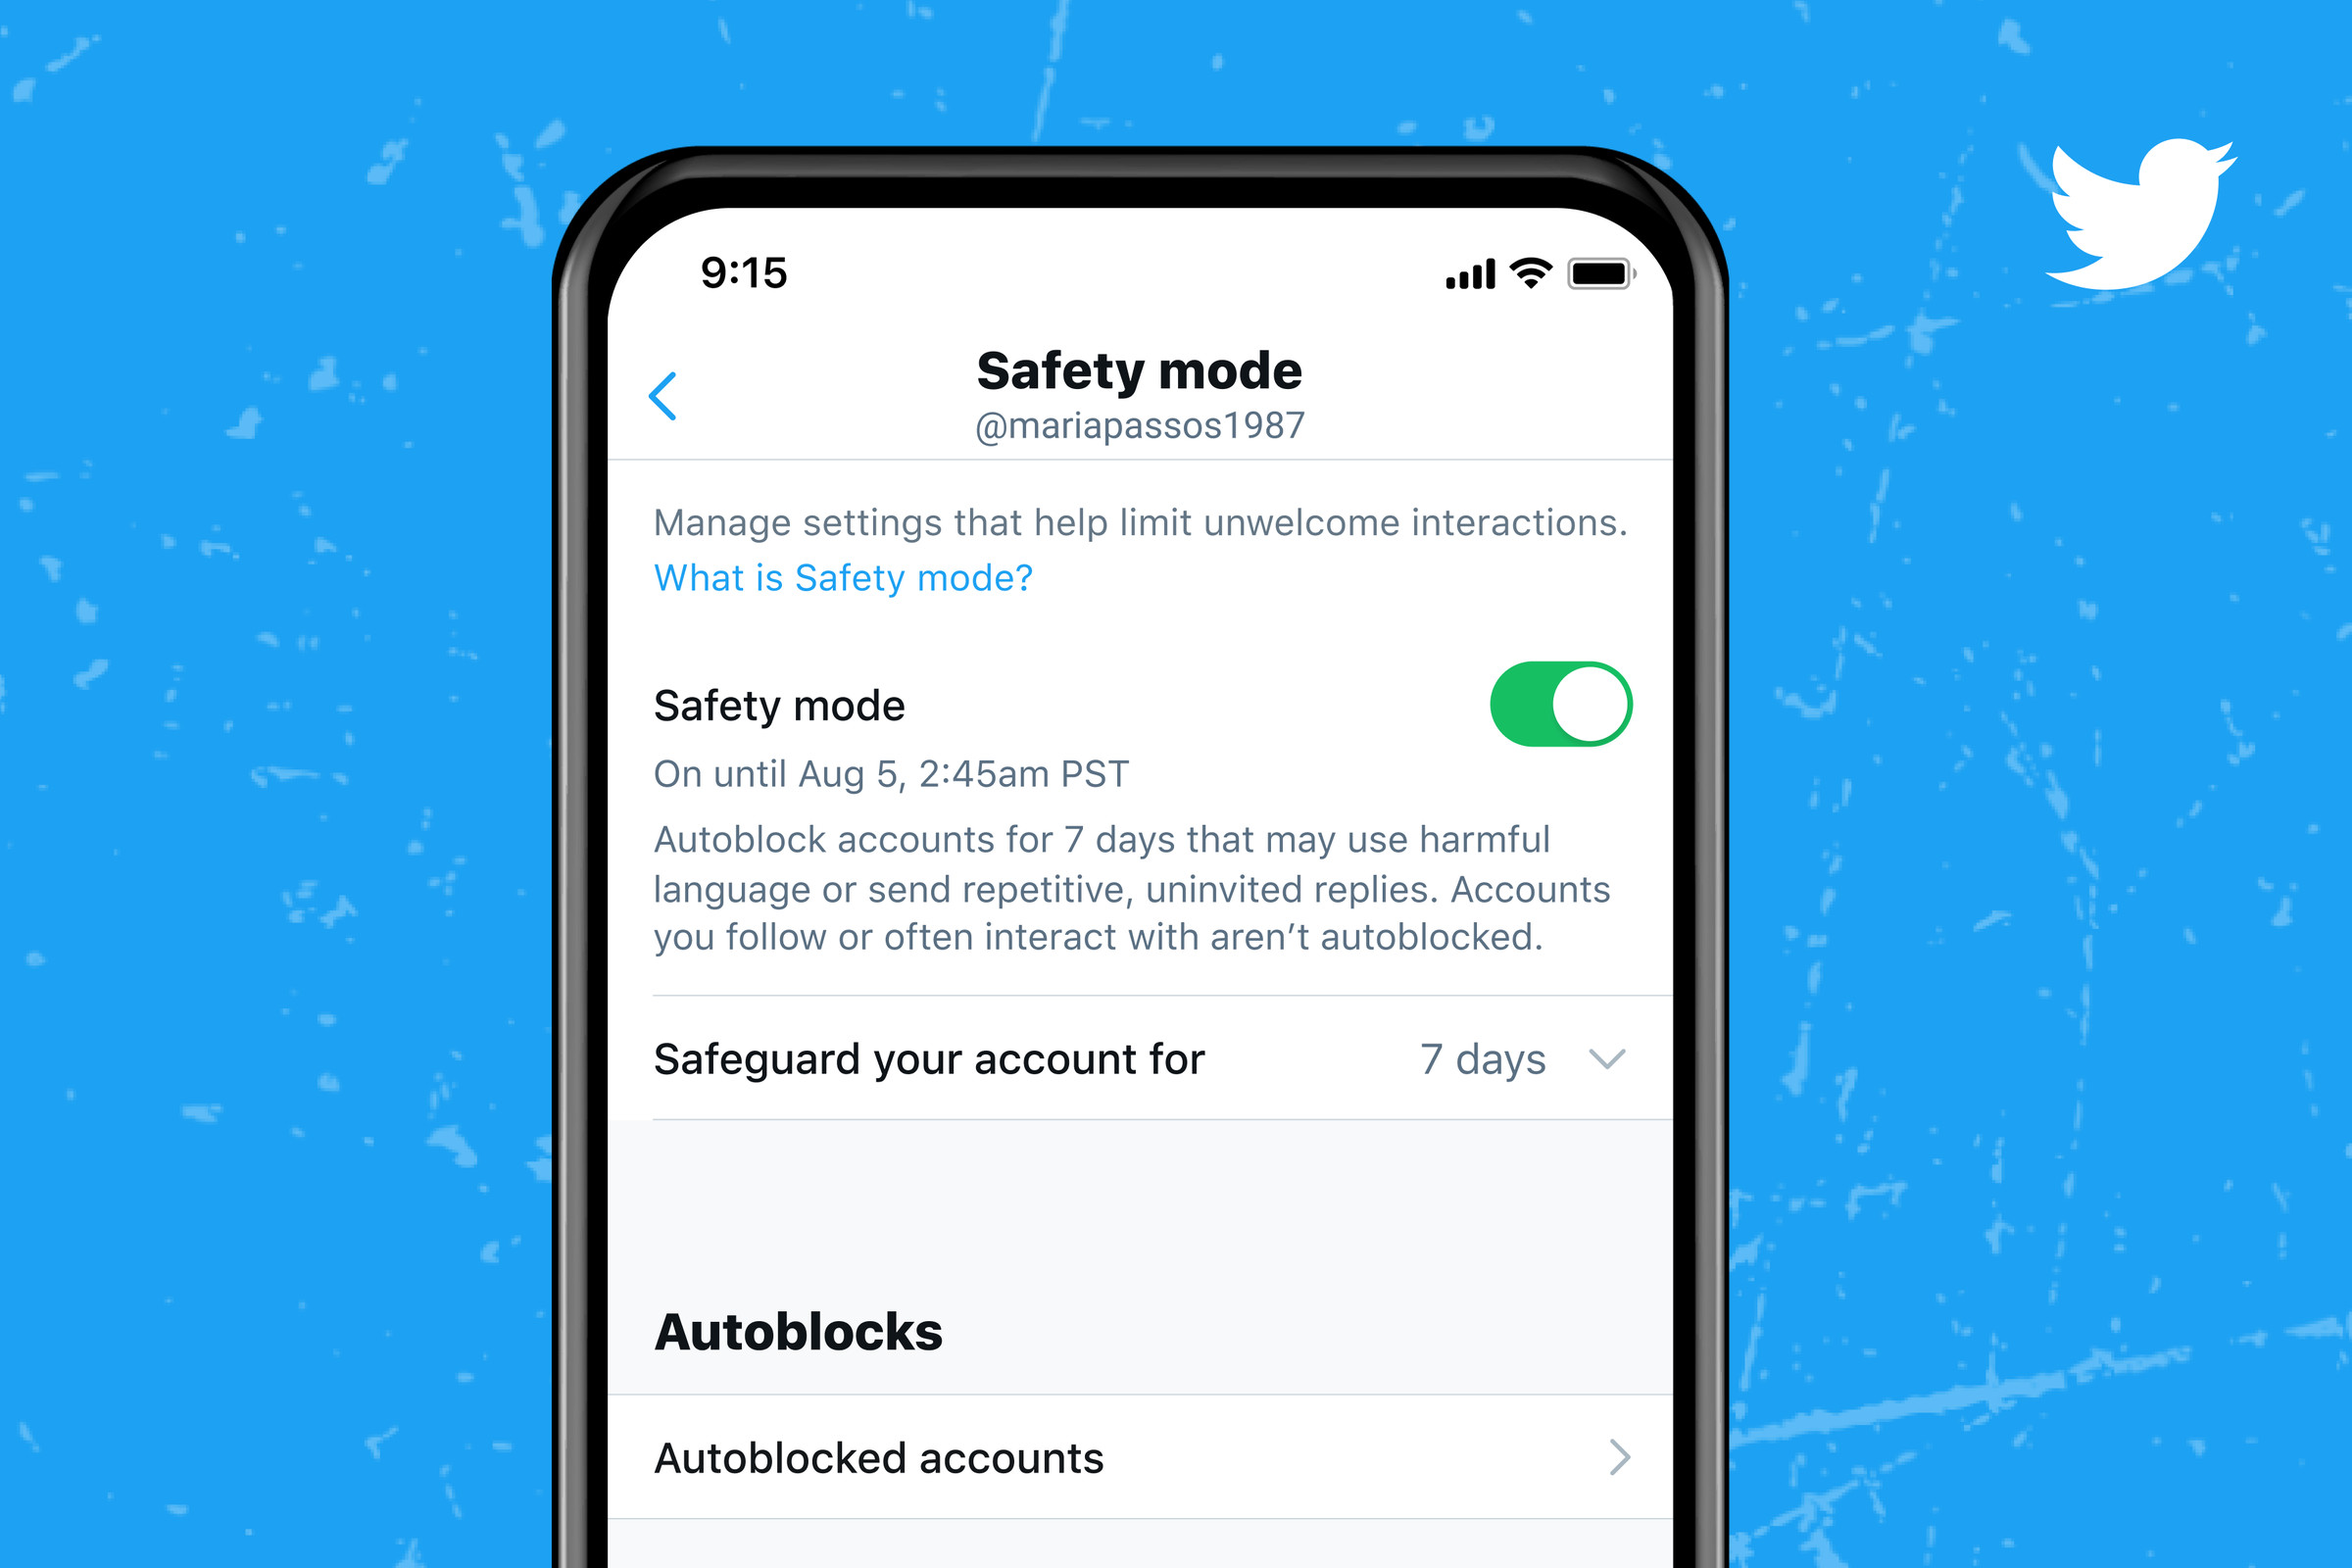 Here’s what Safety Mode settings look like.